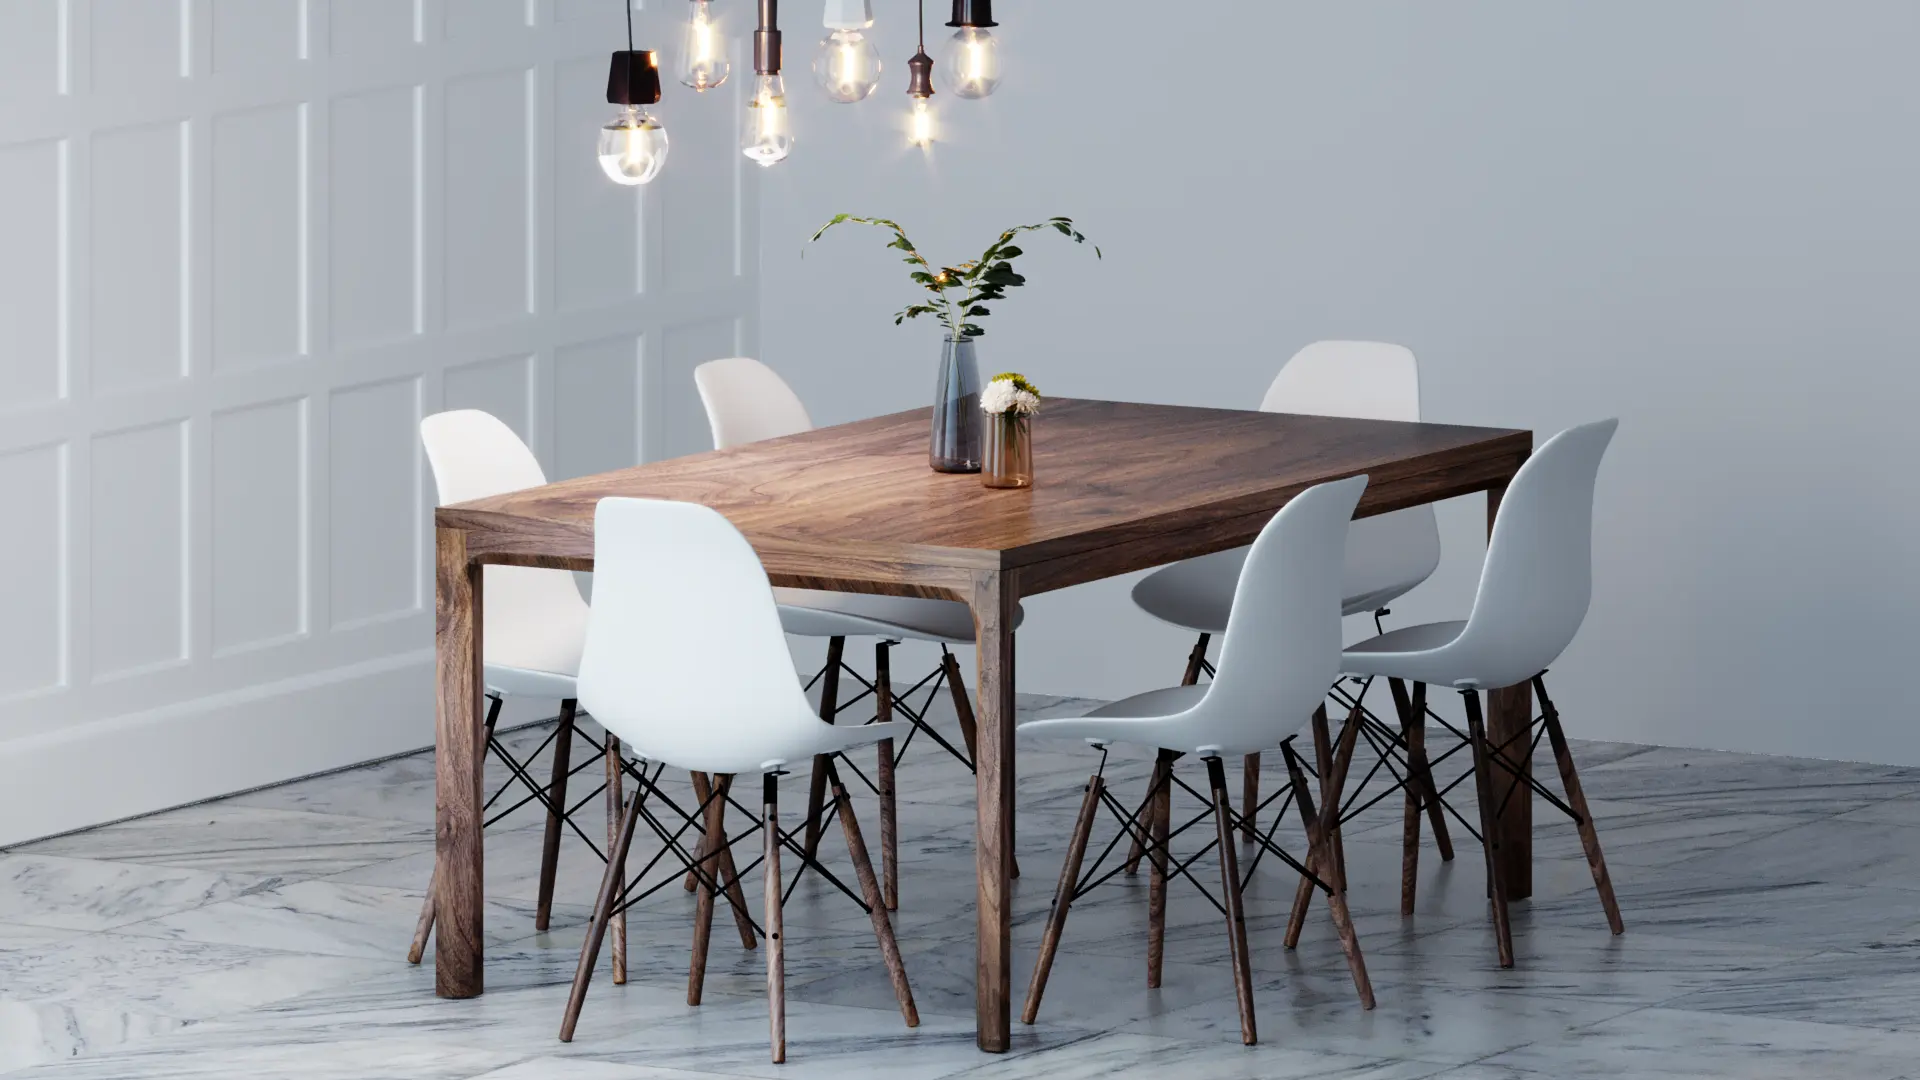 Large Danish Modern Wooden Extendable Dining Table